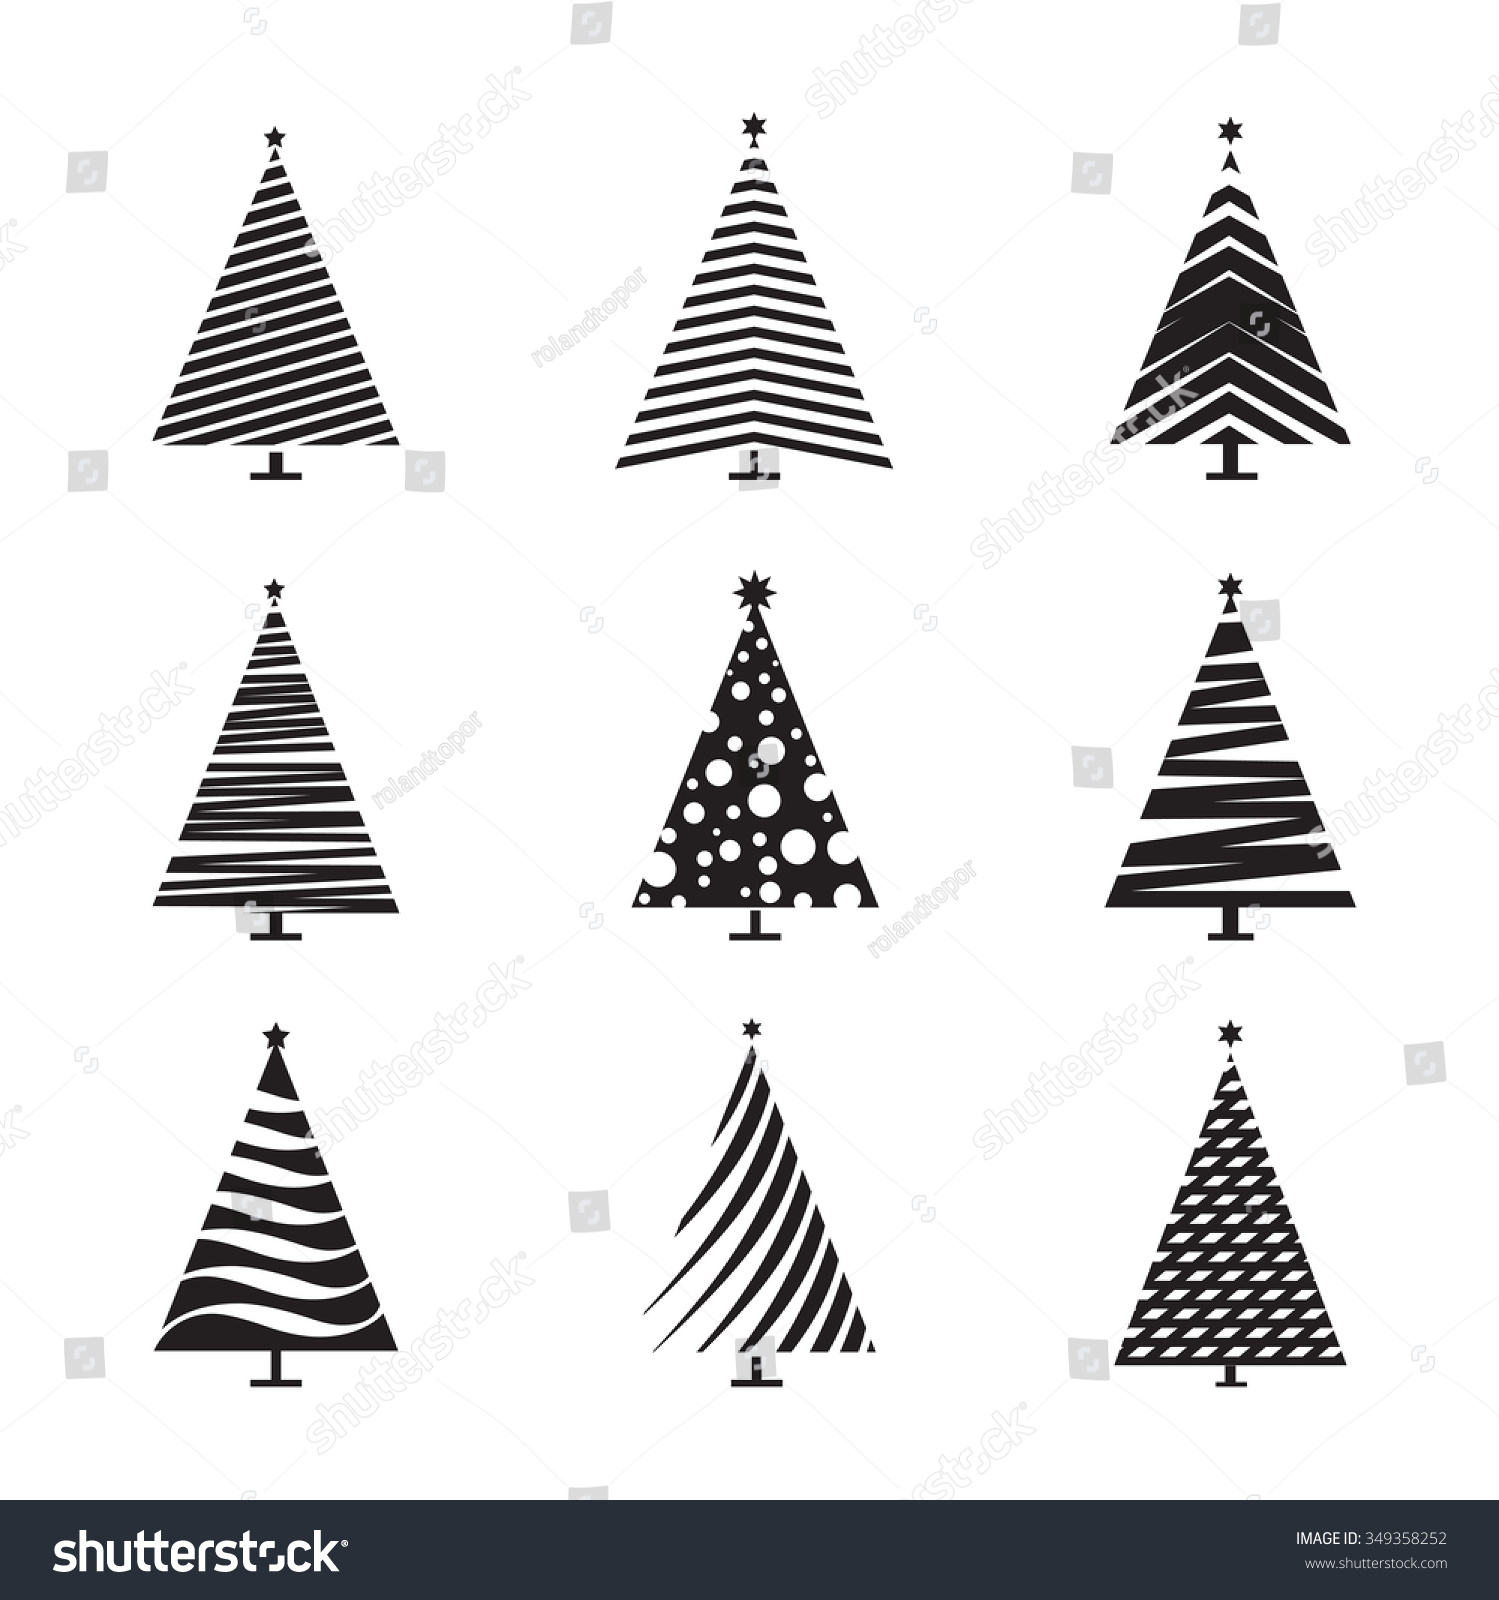 Set Of Black Christmas Tree. Vector Illustration And Icons - 349358252 ...